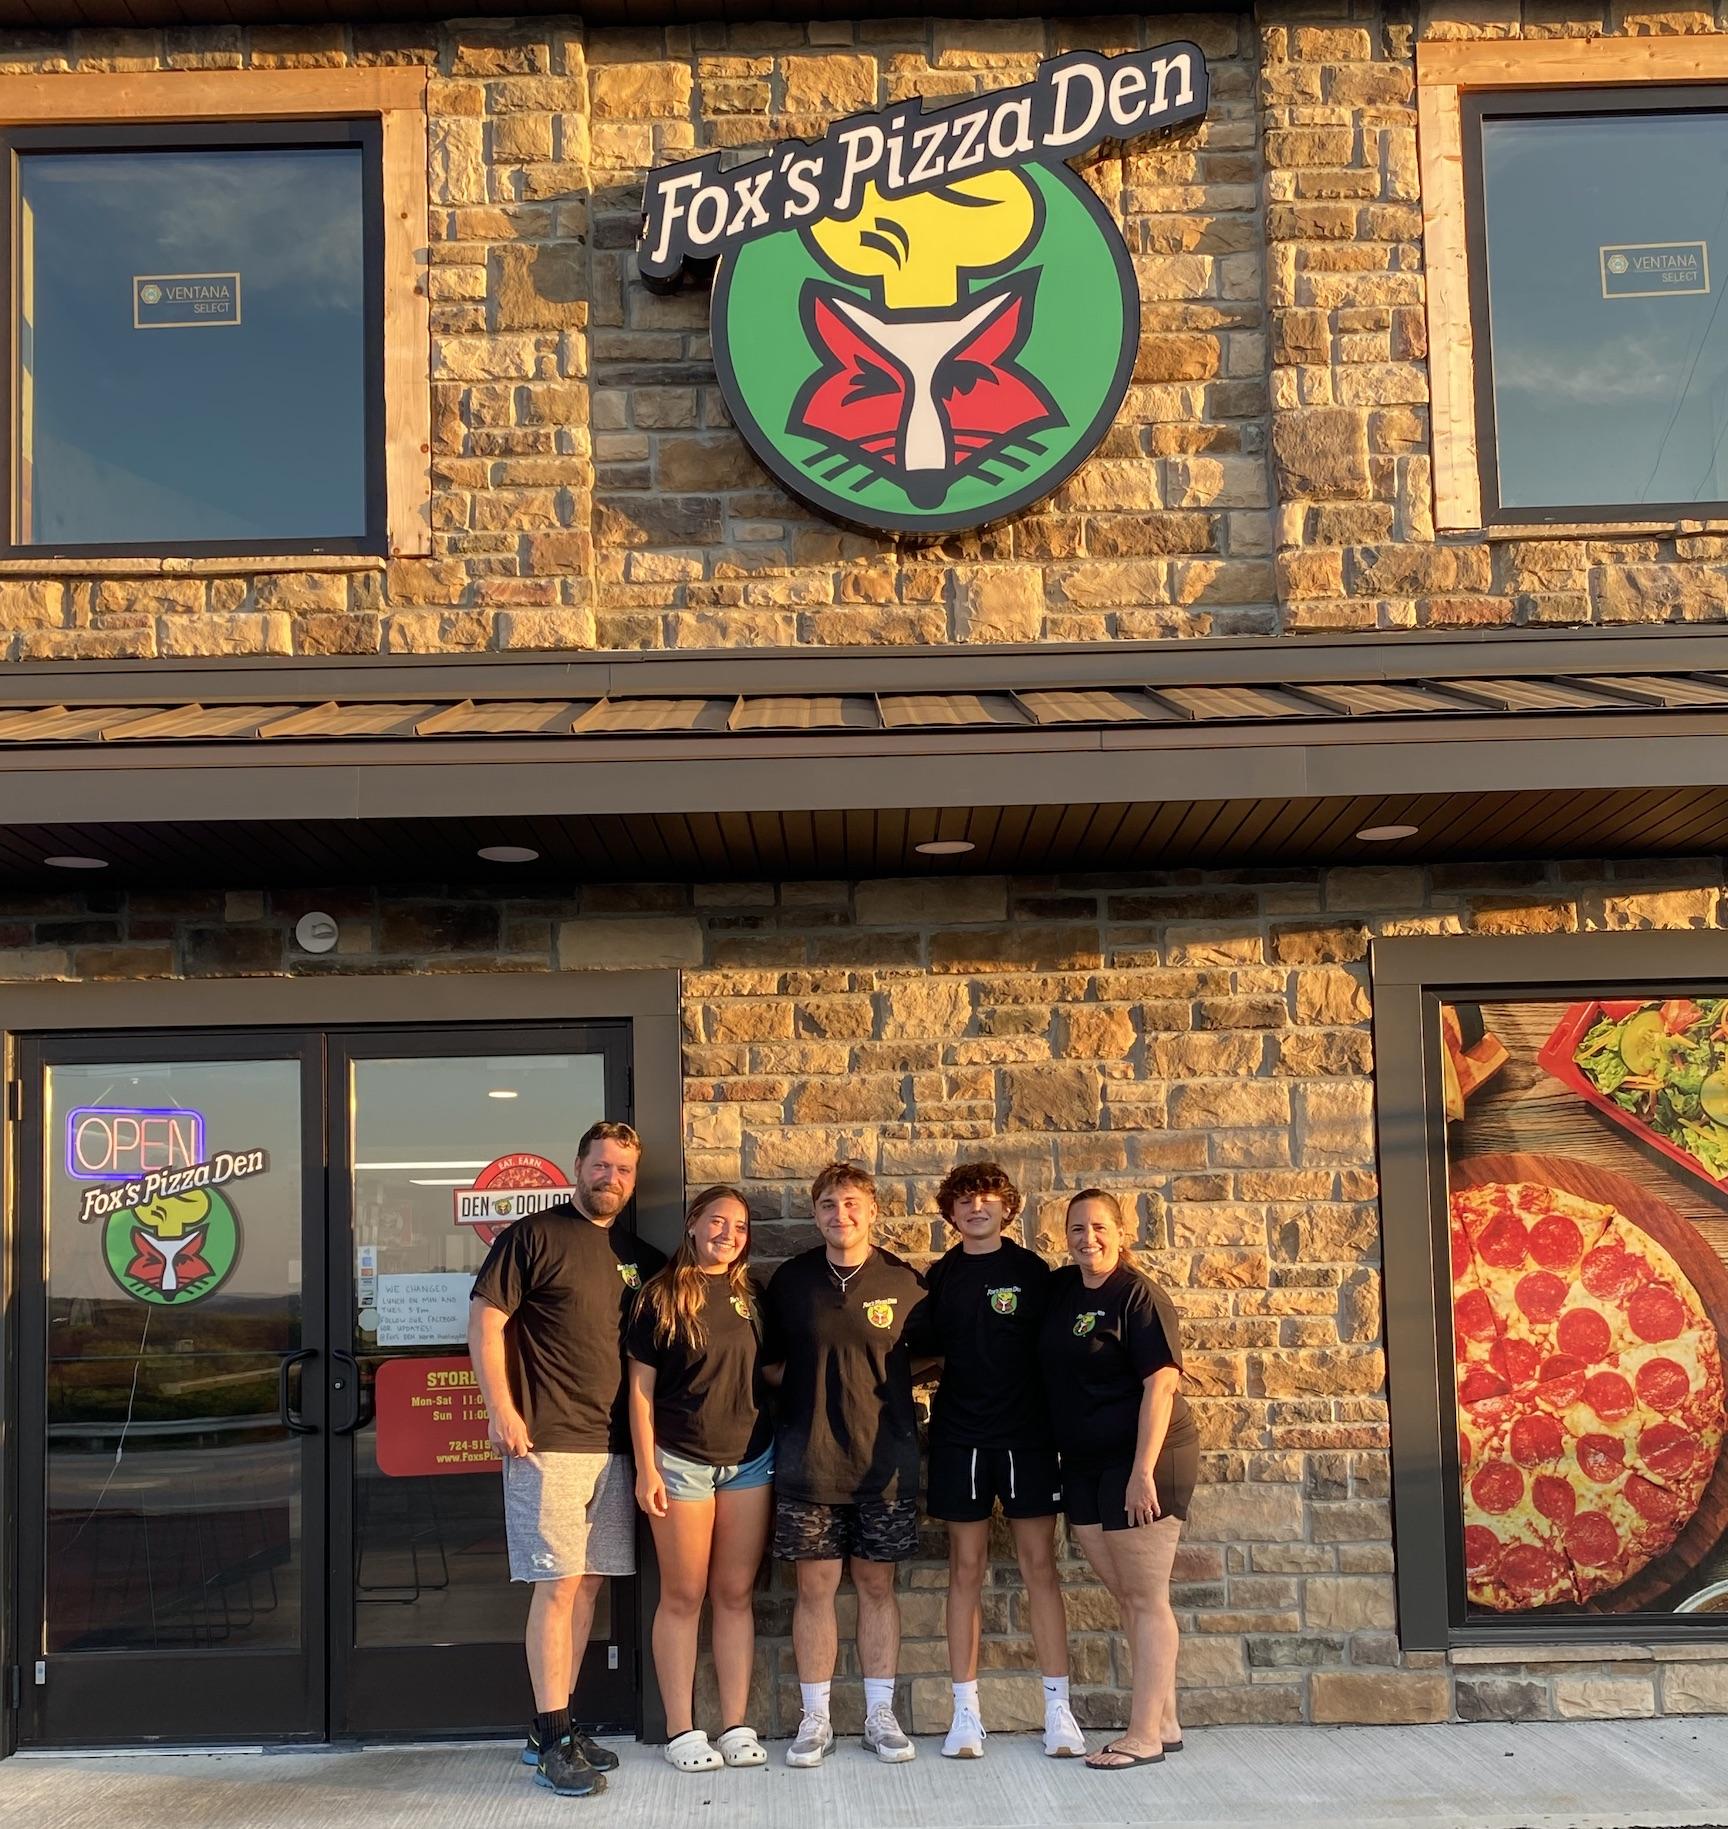 The McBriar Family (Chris, Morgan, Connor, Luke and Dana) owners of Fox’s Pizza, donated funds for the classroom makeover